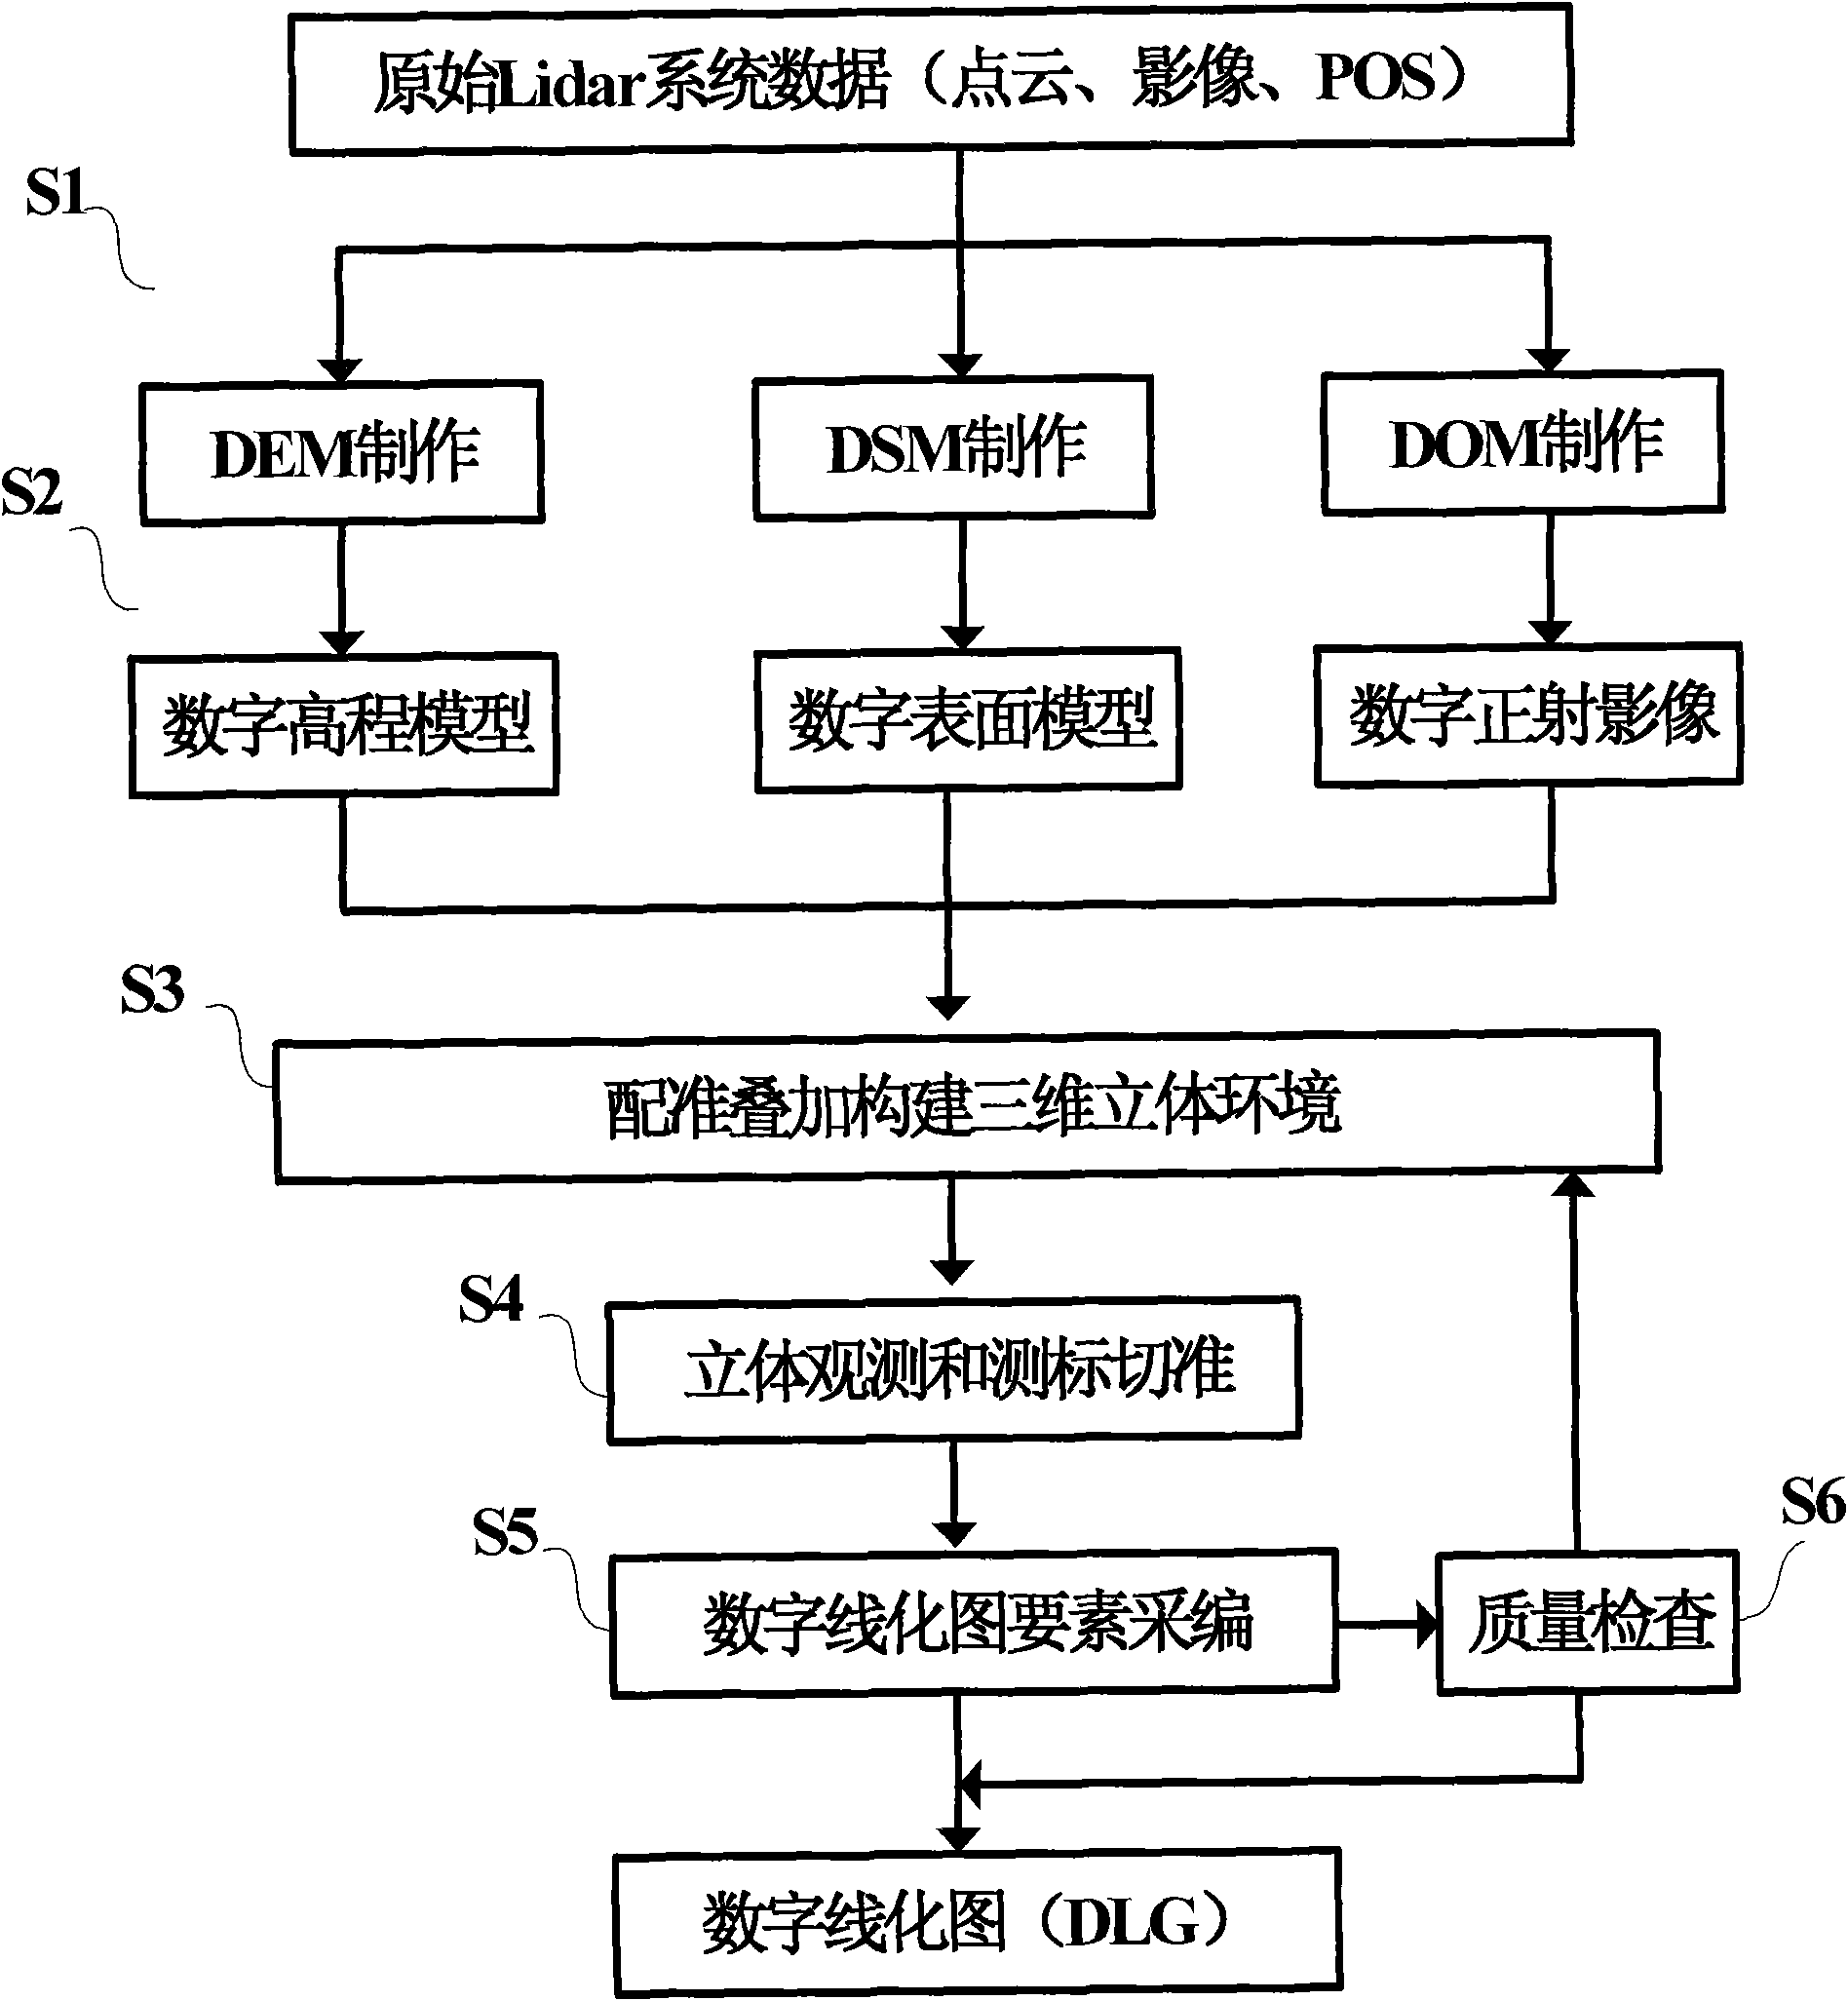 Method for measuring image and inspecting quantity under light detection and ranging (LiDAR) three-dimensional environment